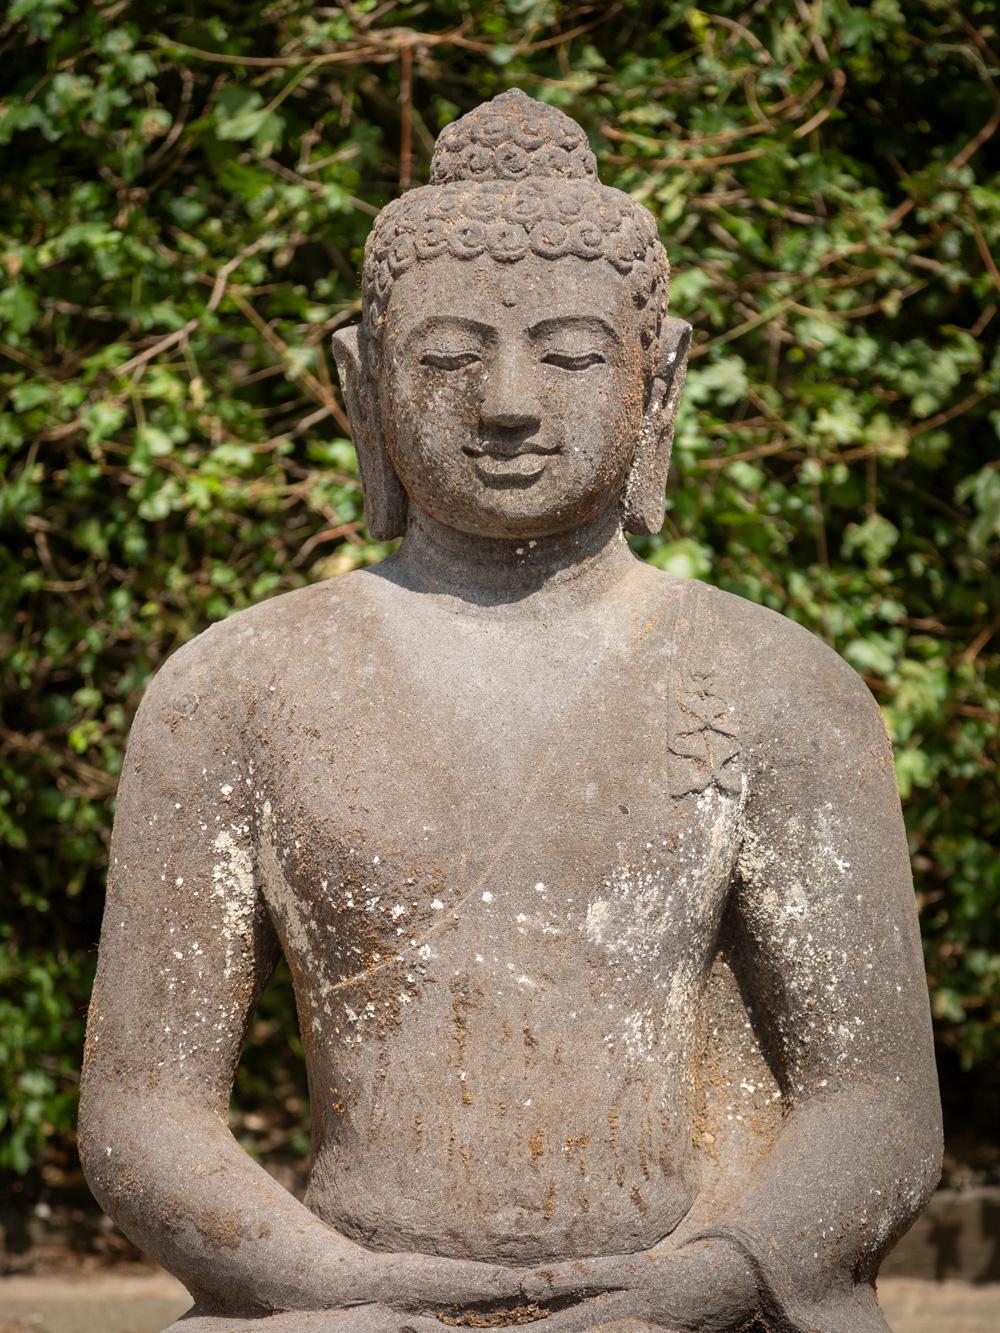 This large lavastone Buddha statue is a remarkable piece of art and spirituality. Crafted from lavastone, it stands at an impressive height of 109 cm, with dimensions of 83 cm in width and 58 cm in depth. Its estimated weight of approximately 300 kg